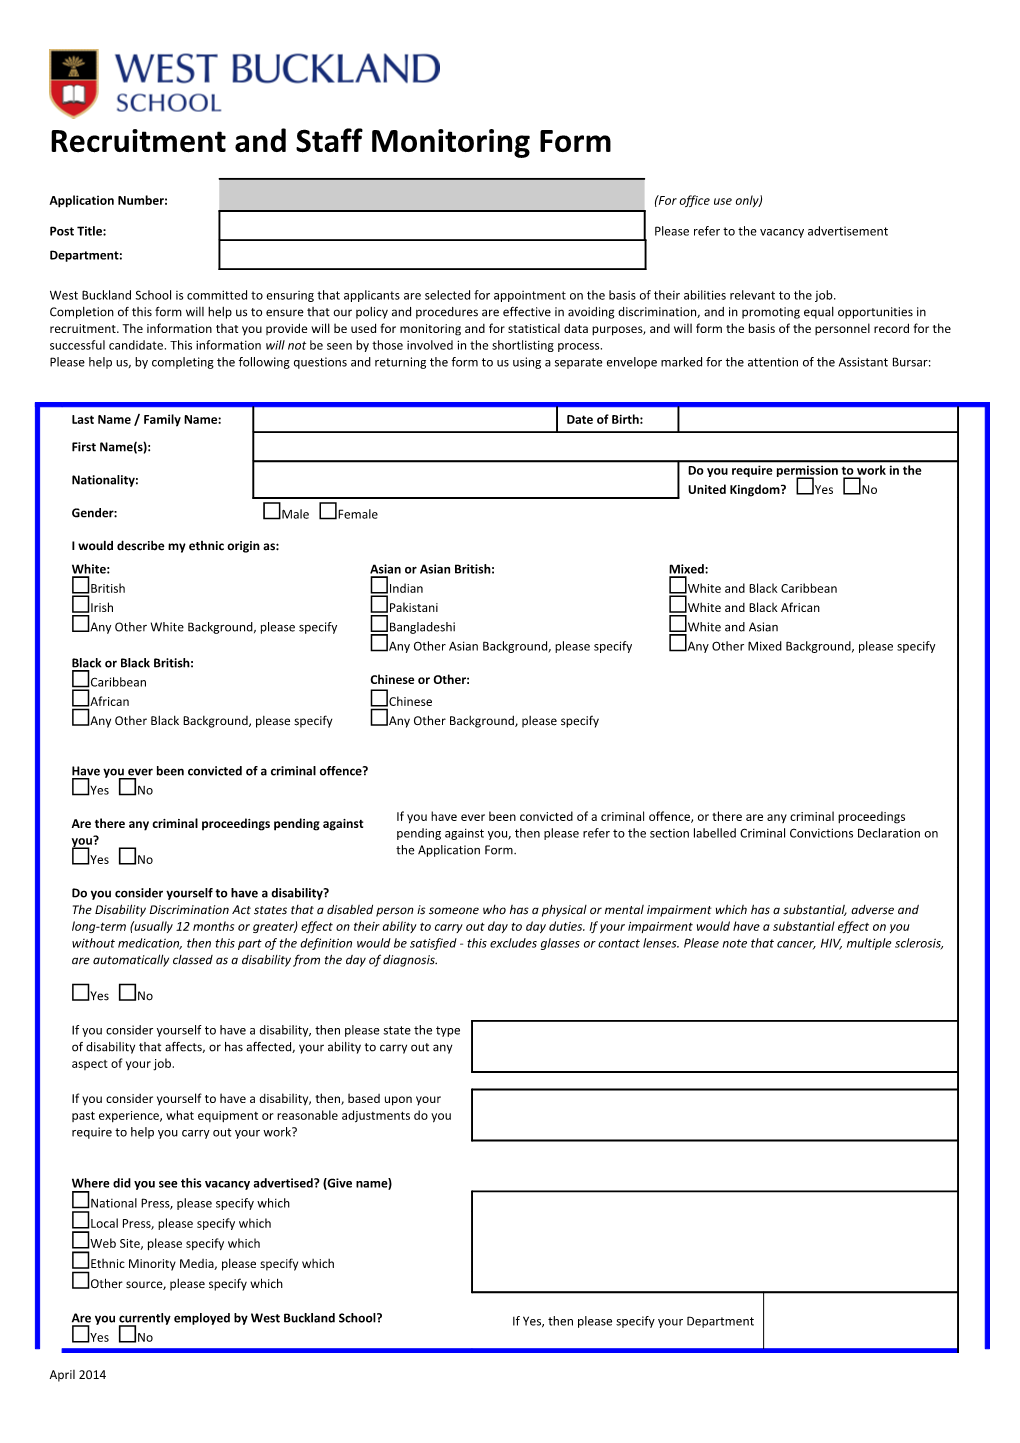 Recruitment and Staff Monitoring Form